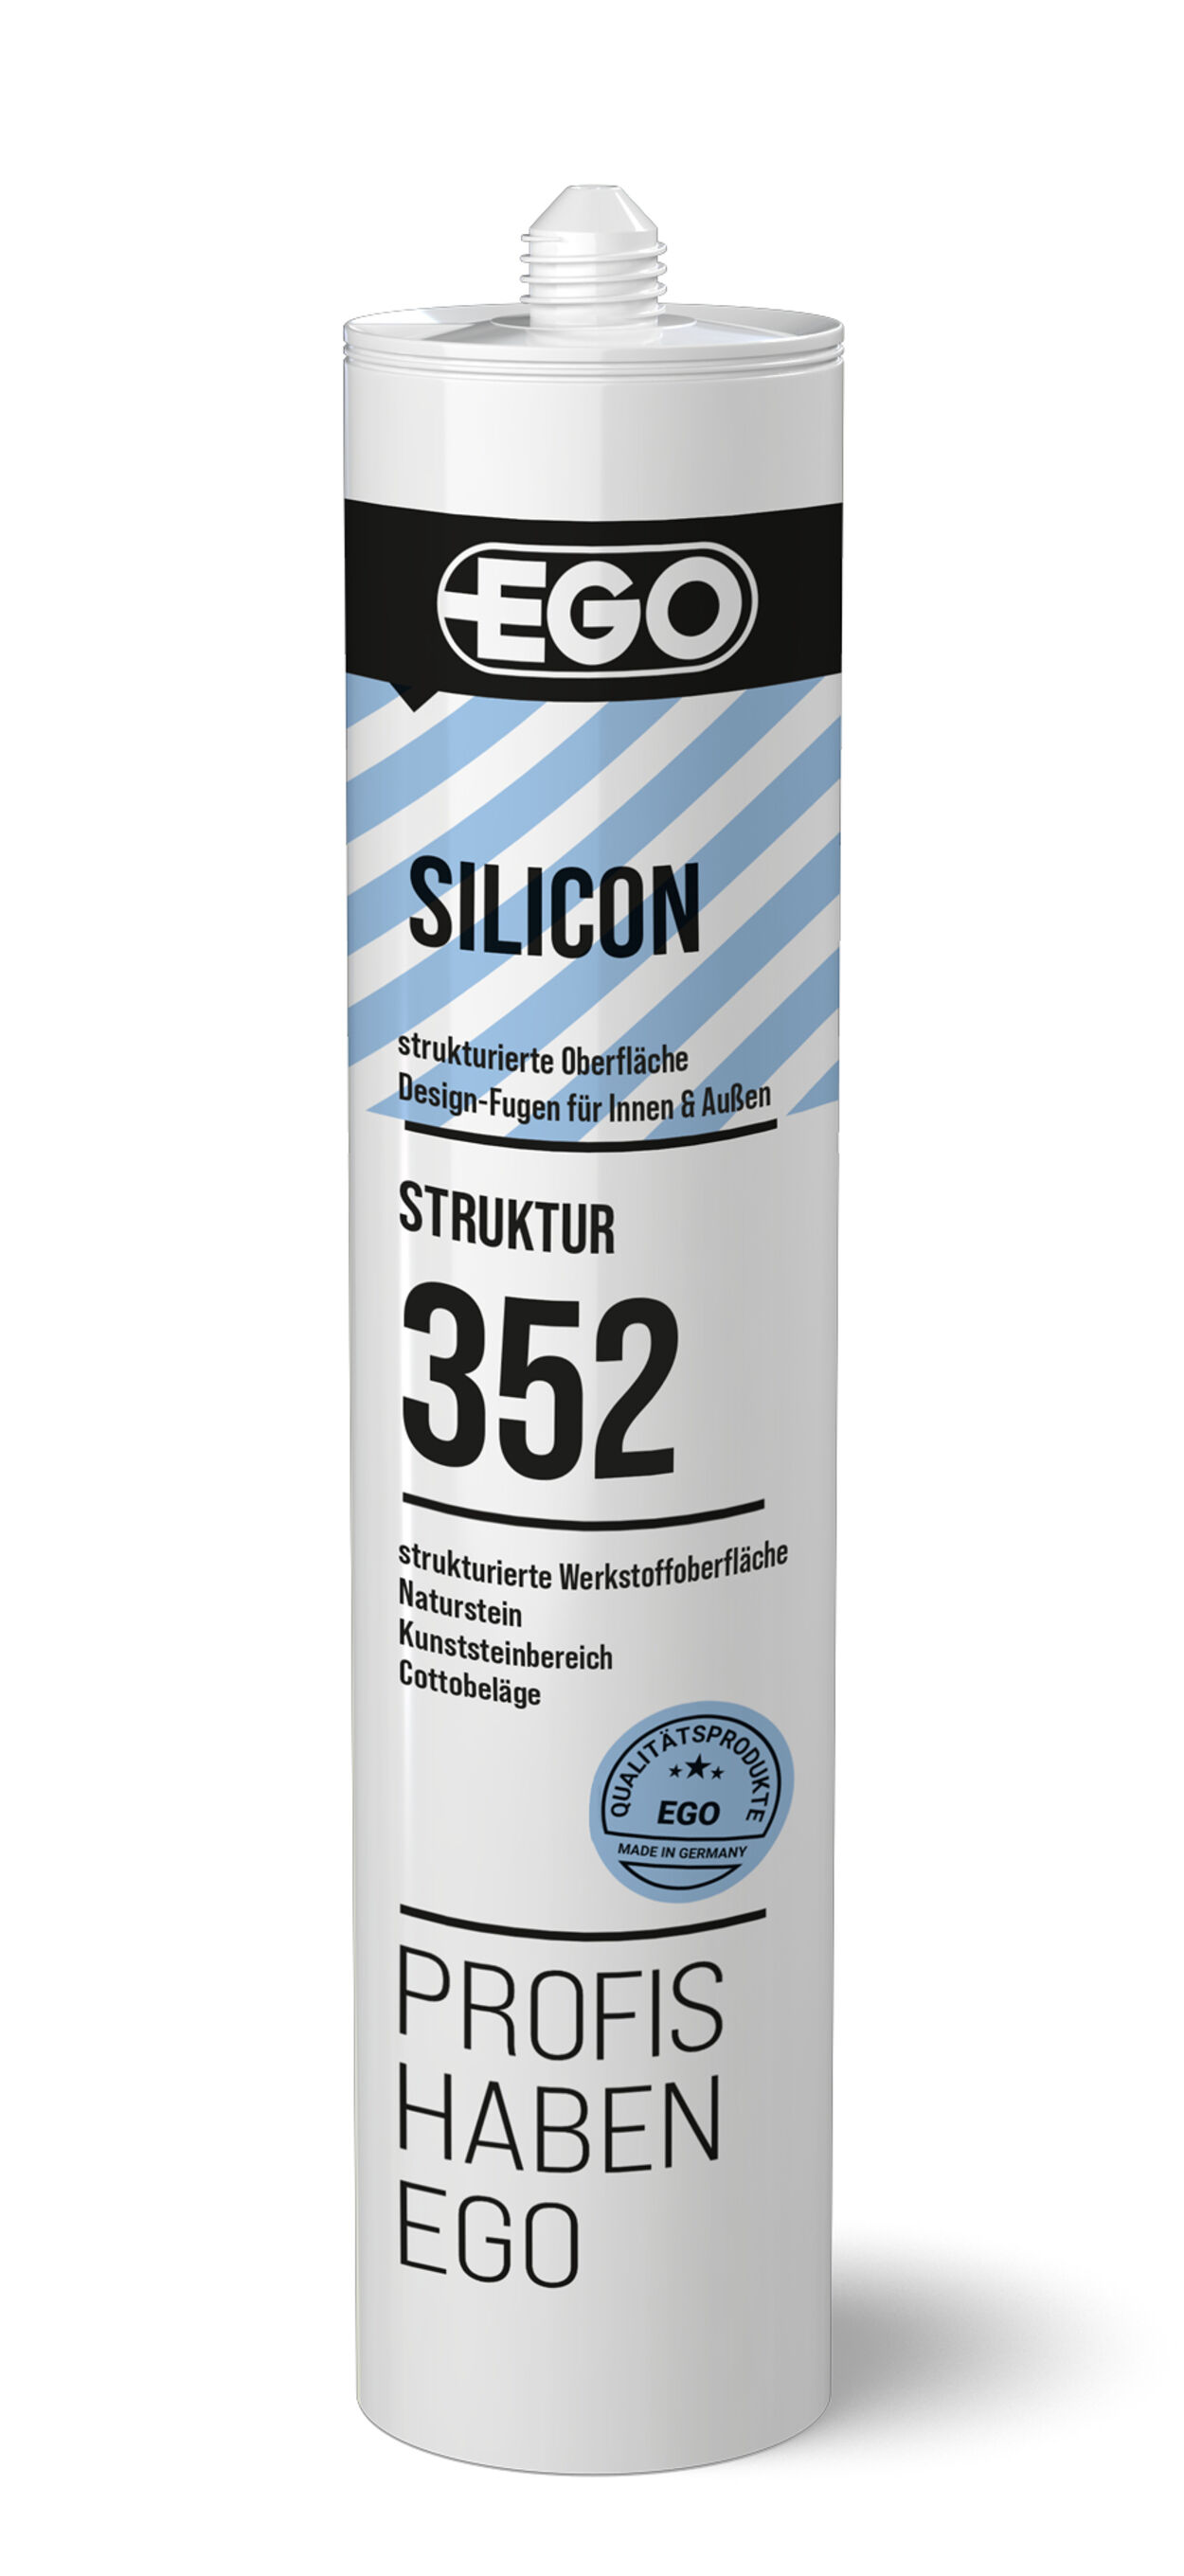 Silicone sealant for natural stone sealing with textured design